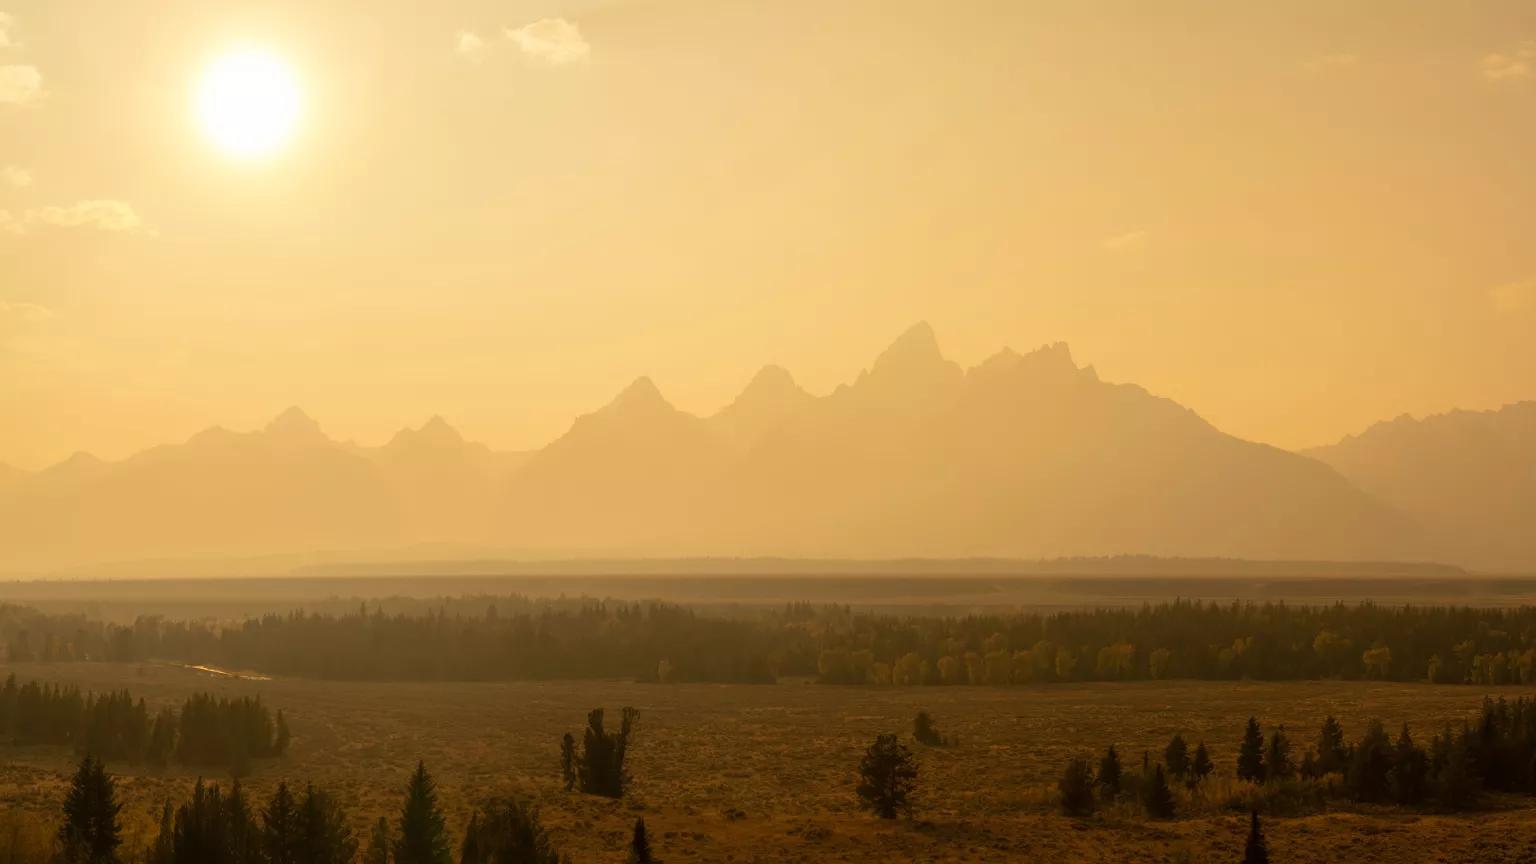 A rugged landscape with mountains in the distance under a hazy, sunny sky